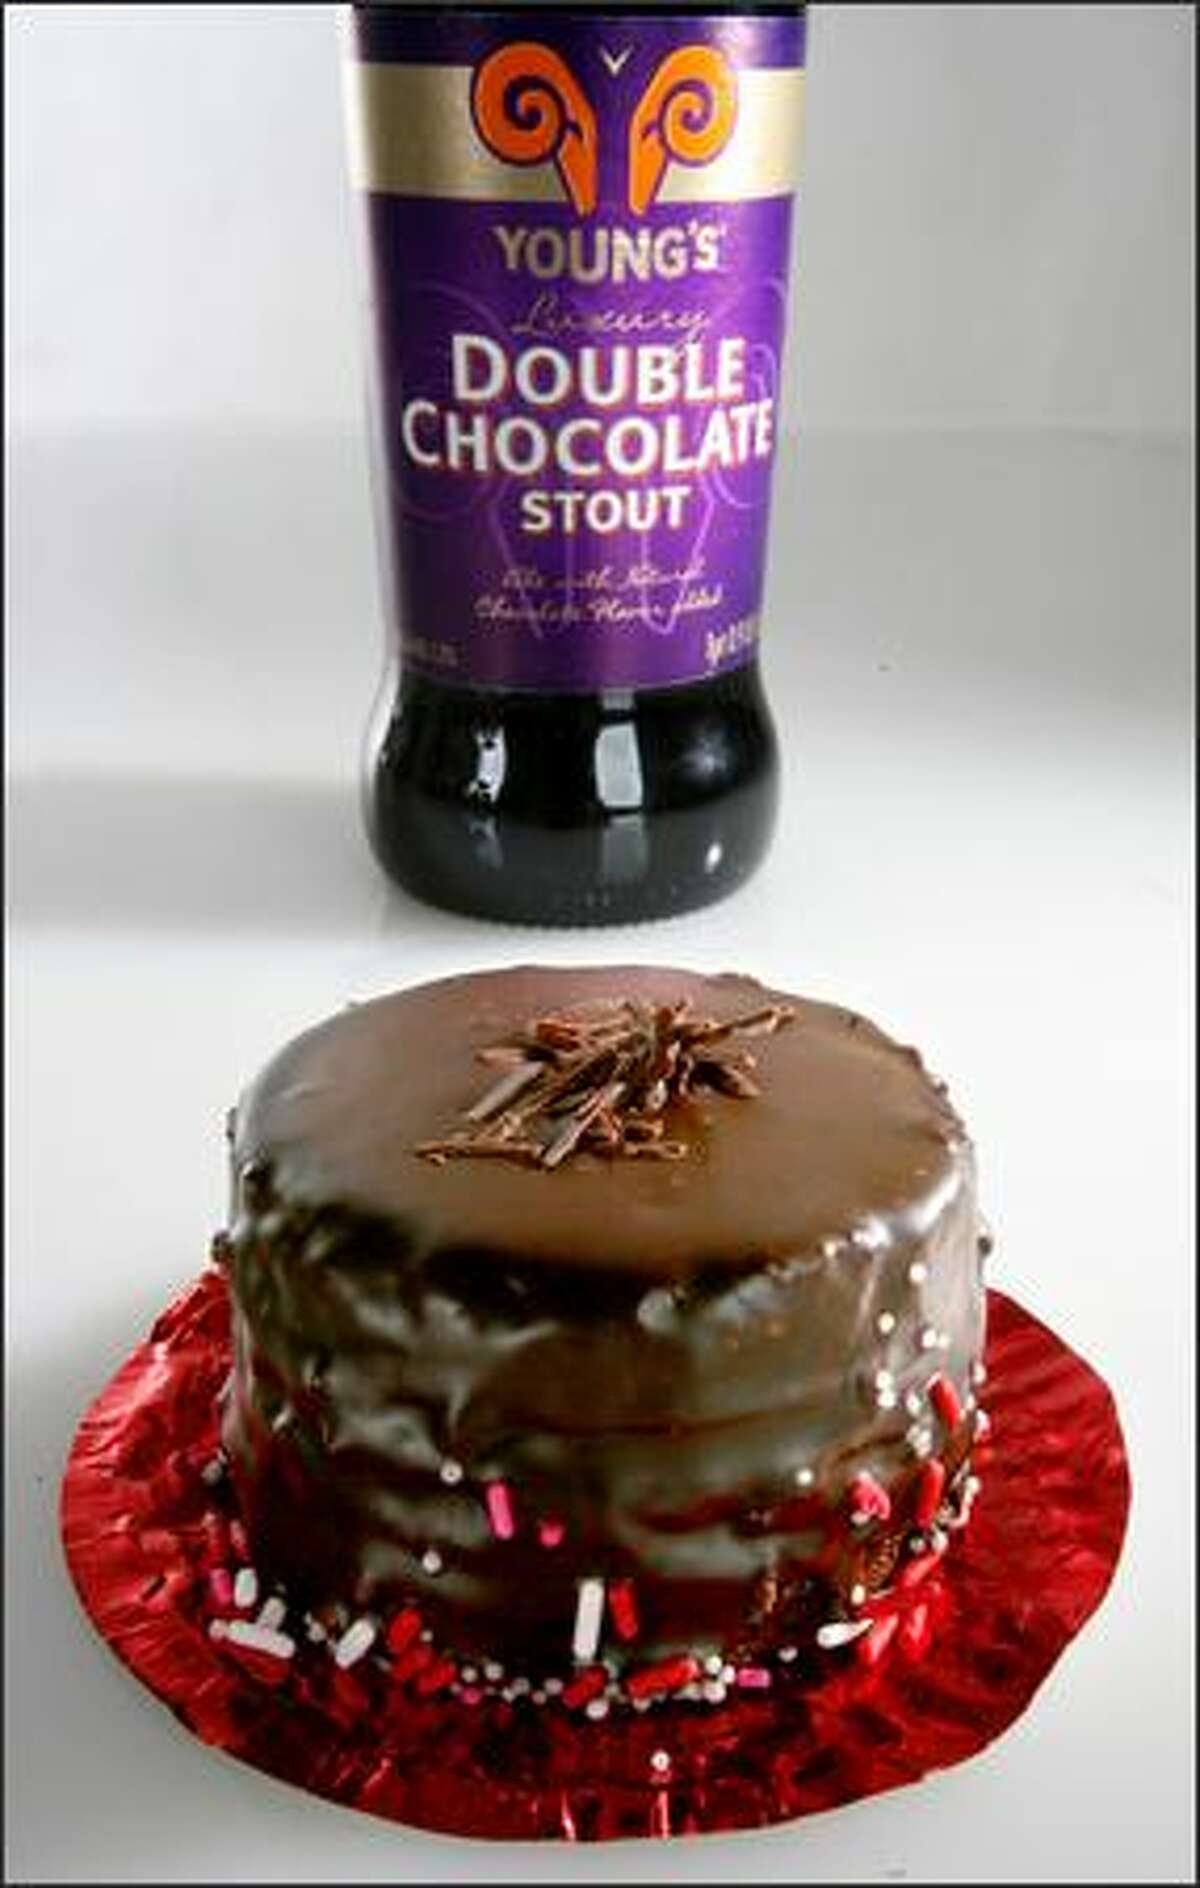 It takes a full-bodied stout beer to handle the Deathcake Royale "cupcake" from Cupcake Royale. The darker stouts and porters usually are safe bets for pairing with chocolate.